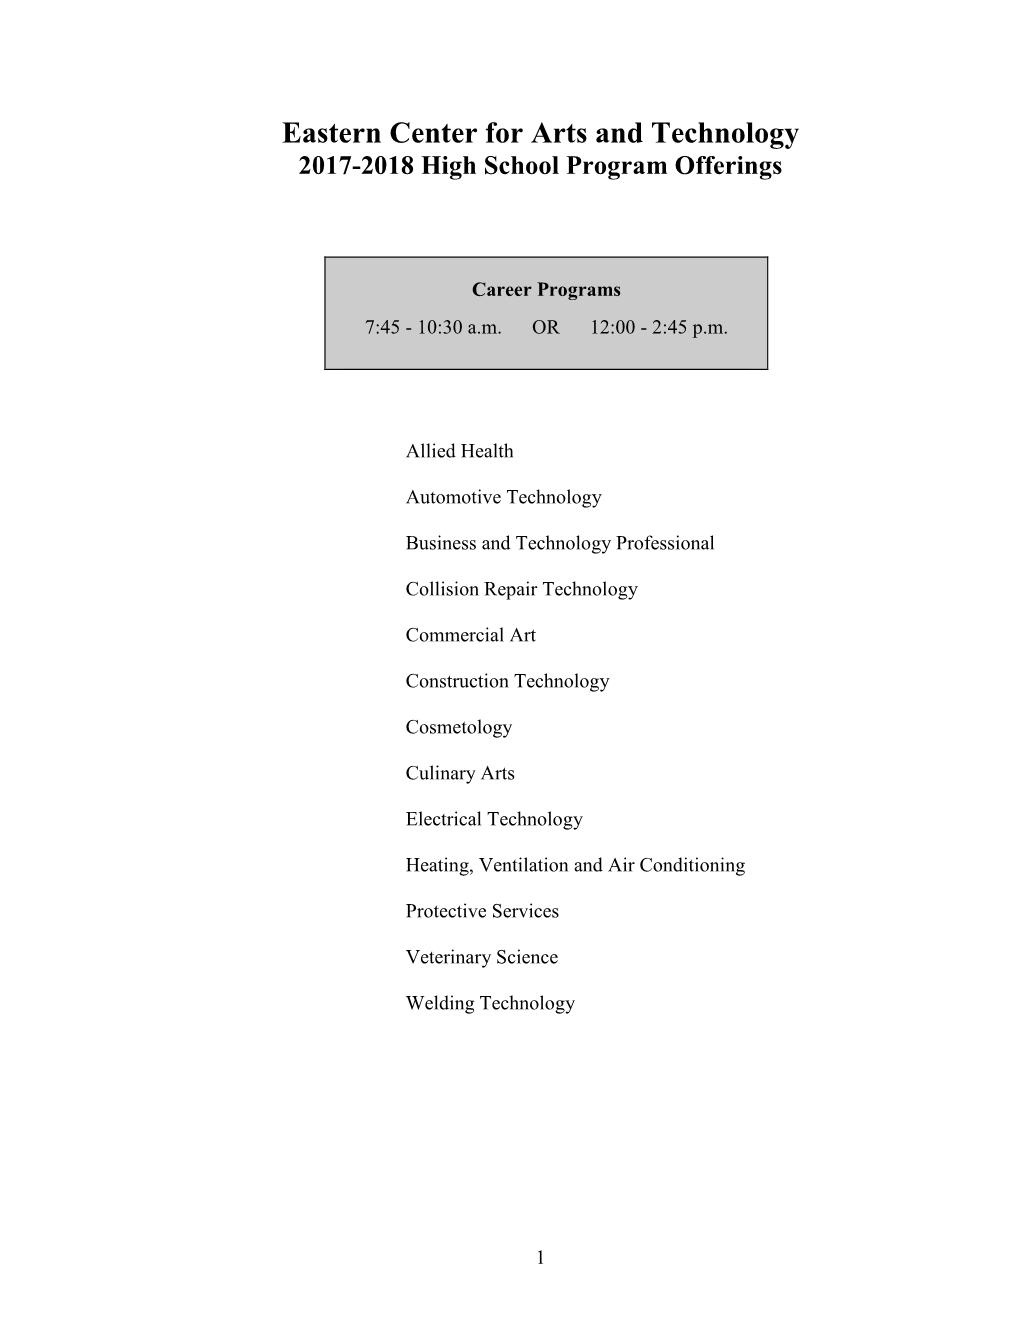 Eastern Center for Arts and Technology 2017-2018 High School Program Offerings